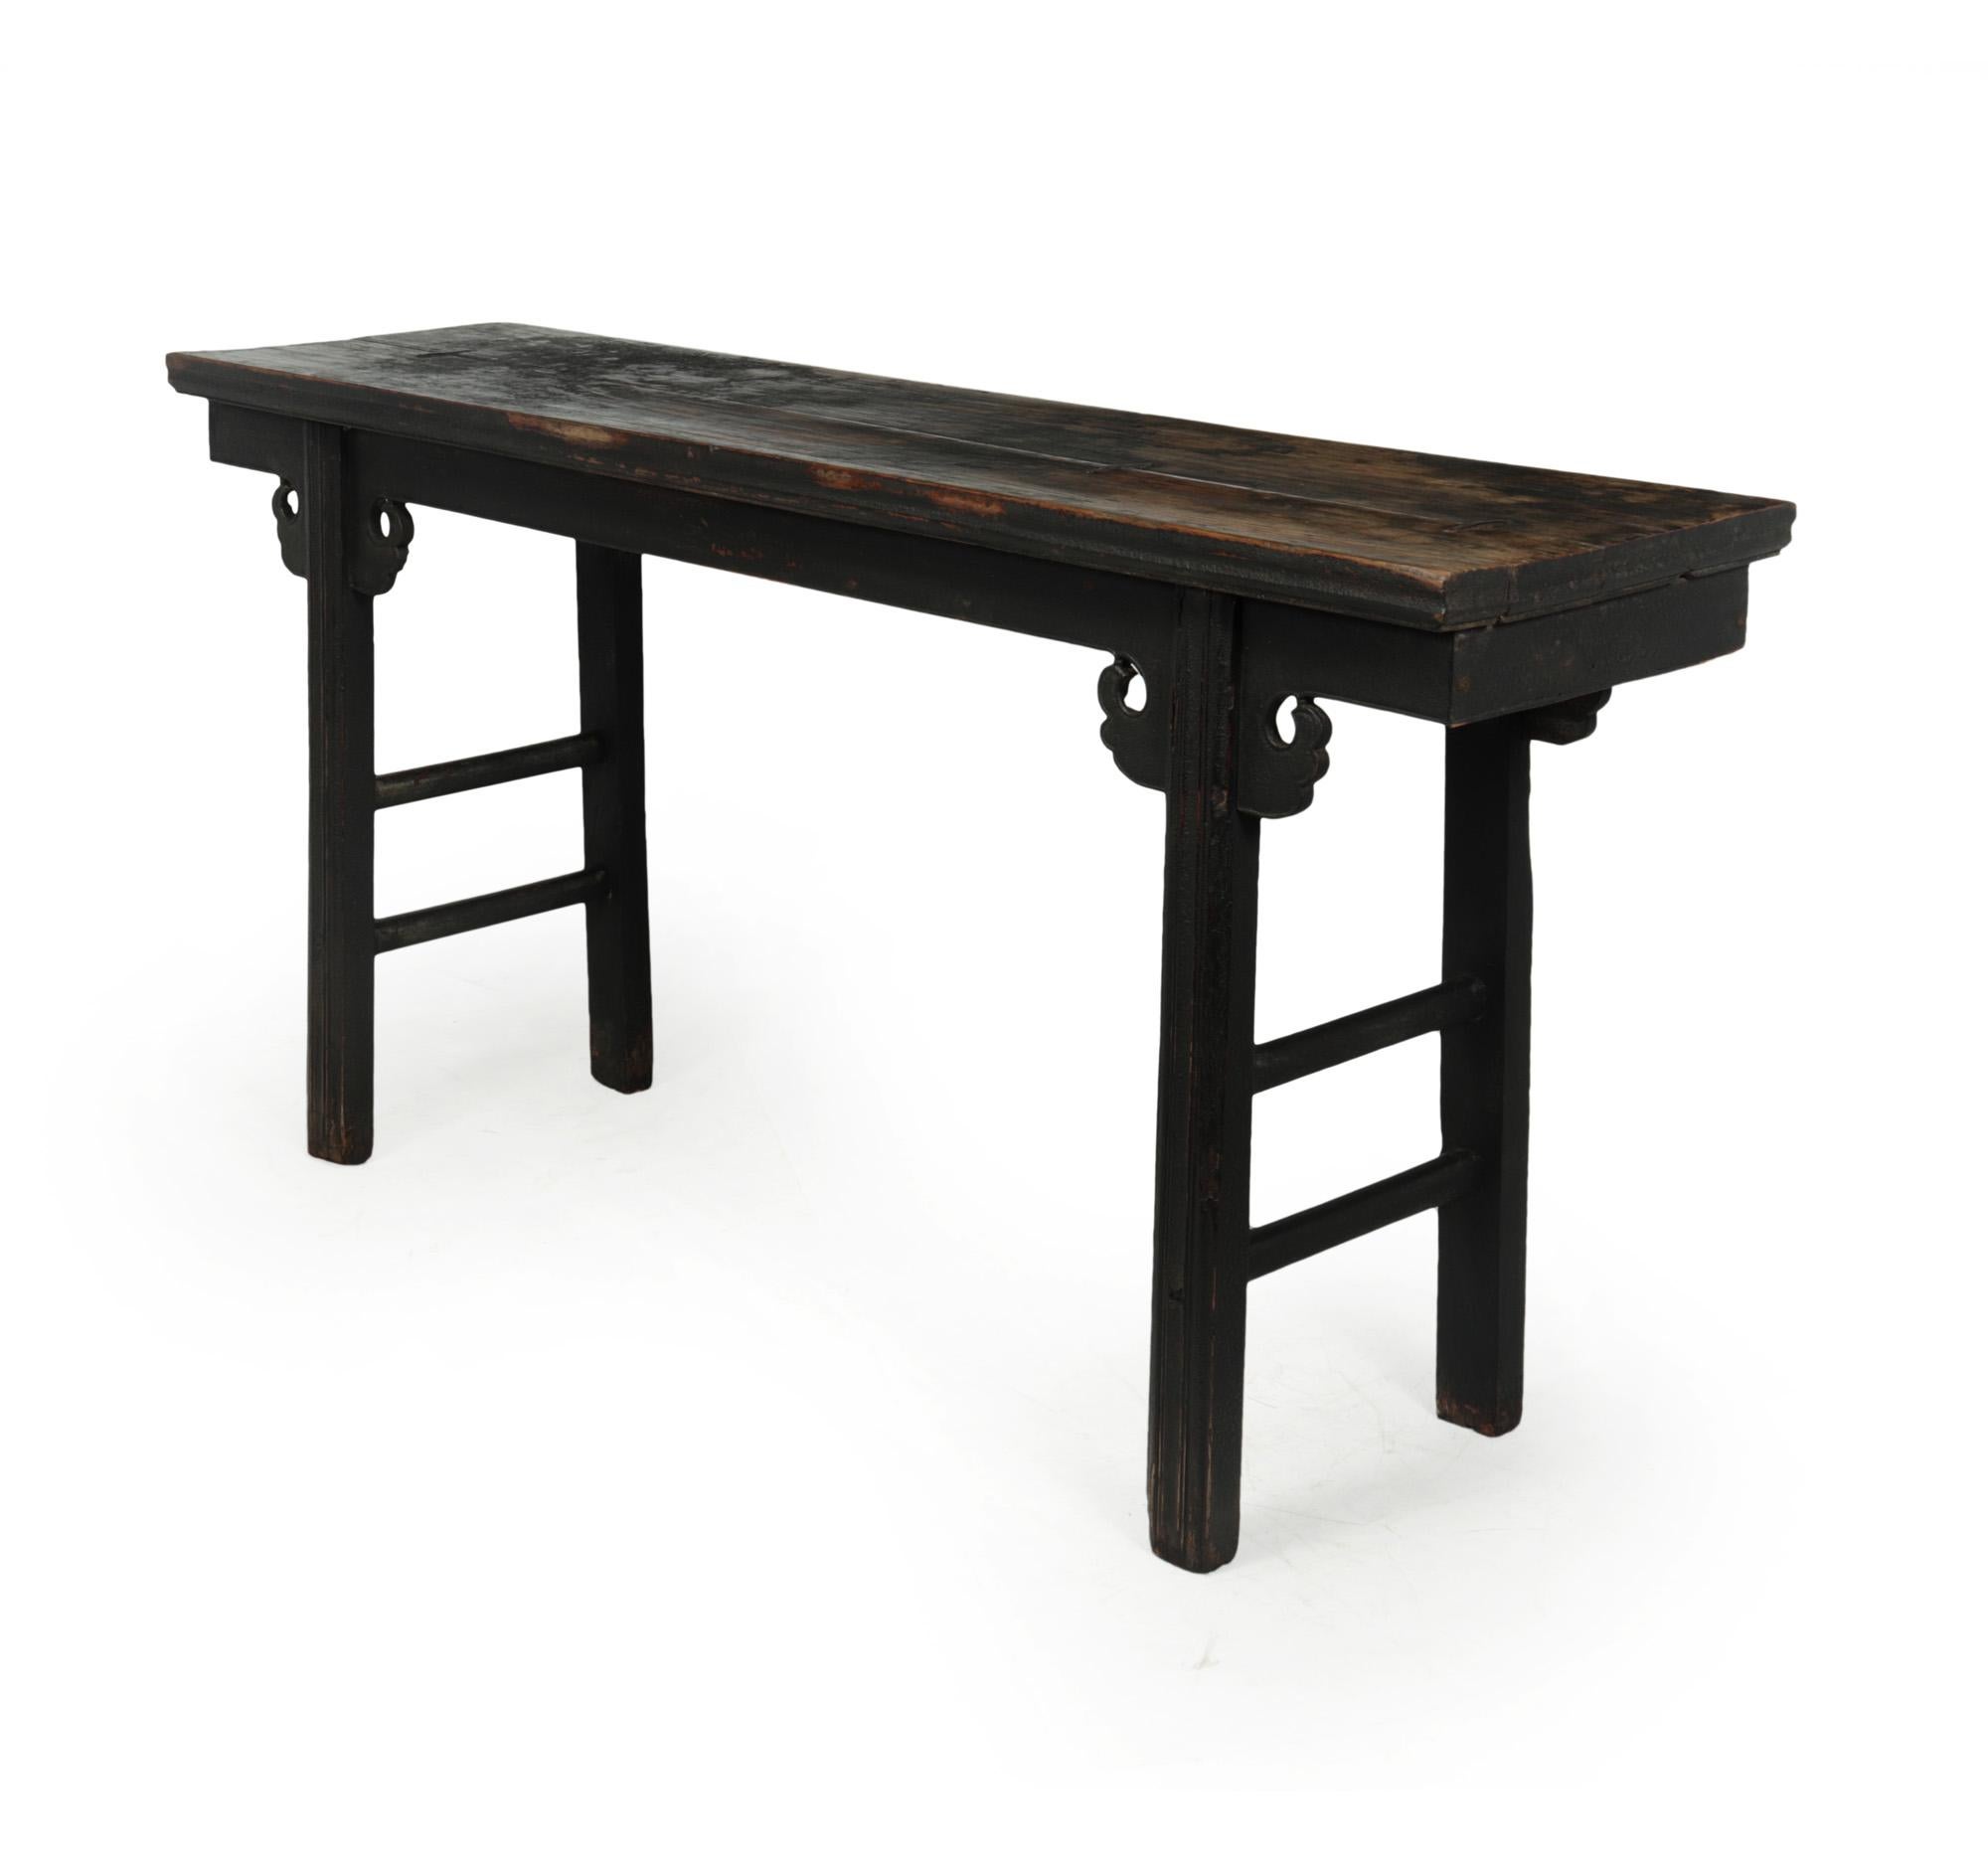 Antique Chinese console table
Produced in the Shanxi province northern china around 1840 – 1860 in solid elm, with red and black lacquer. This has losses and great wear on the top and around the legs. The table has clean and elegant lines with